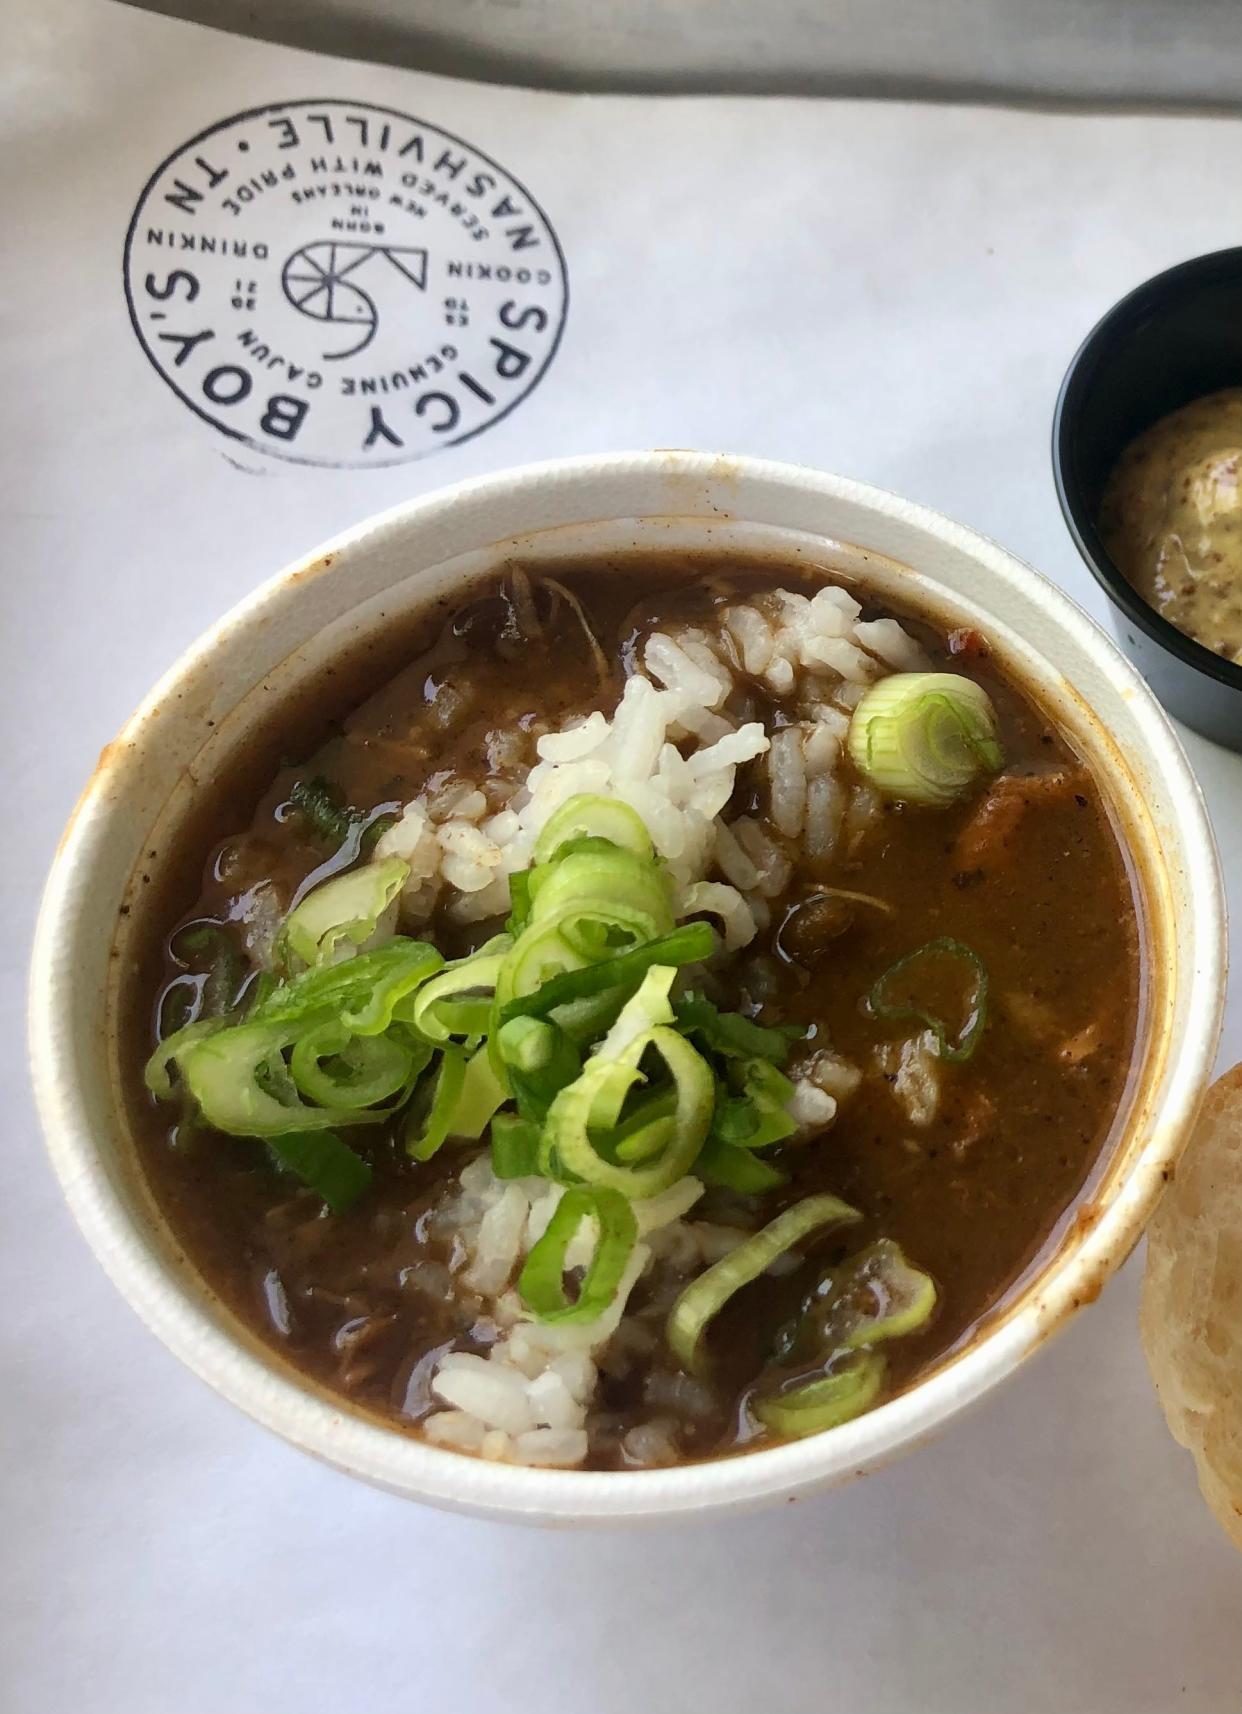 The gumbo at Spicy Boys is comfort in a bowl.